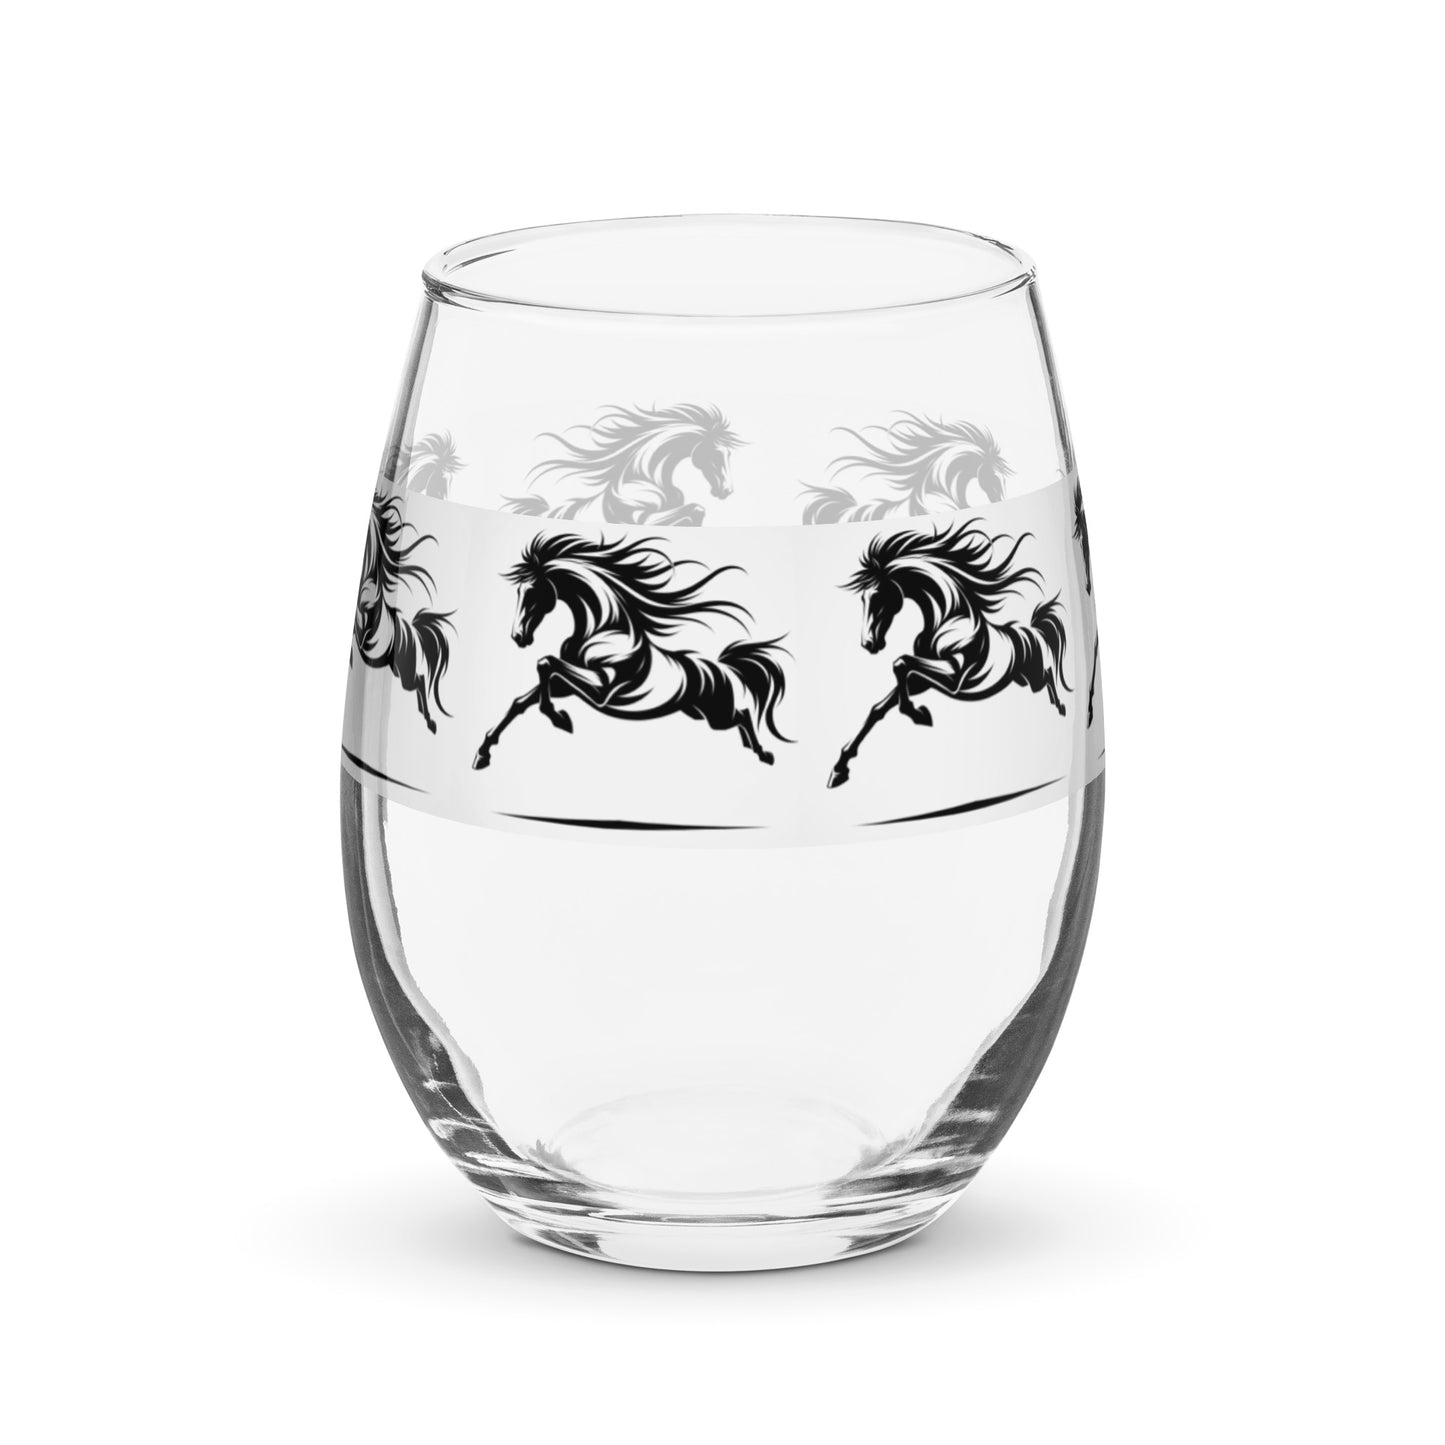 horse horse wine glass personalized wine glass stallion stallion wine glass wine glass